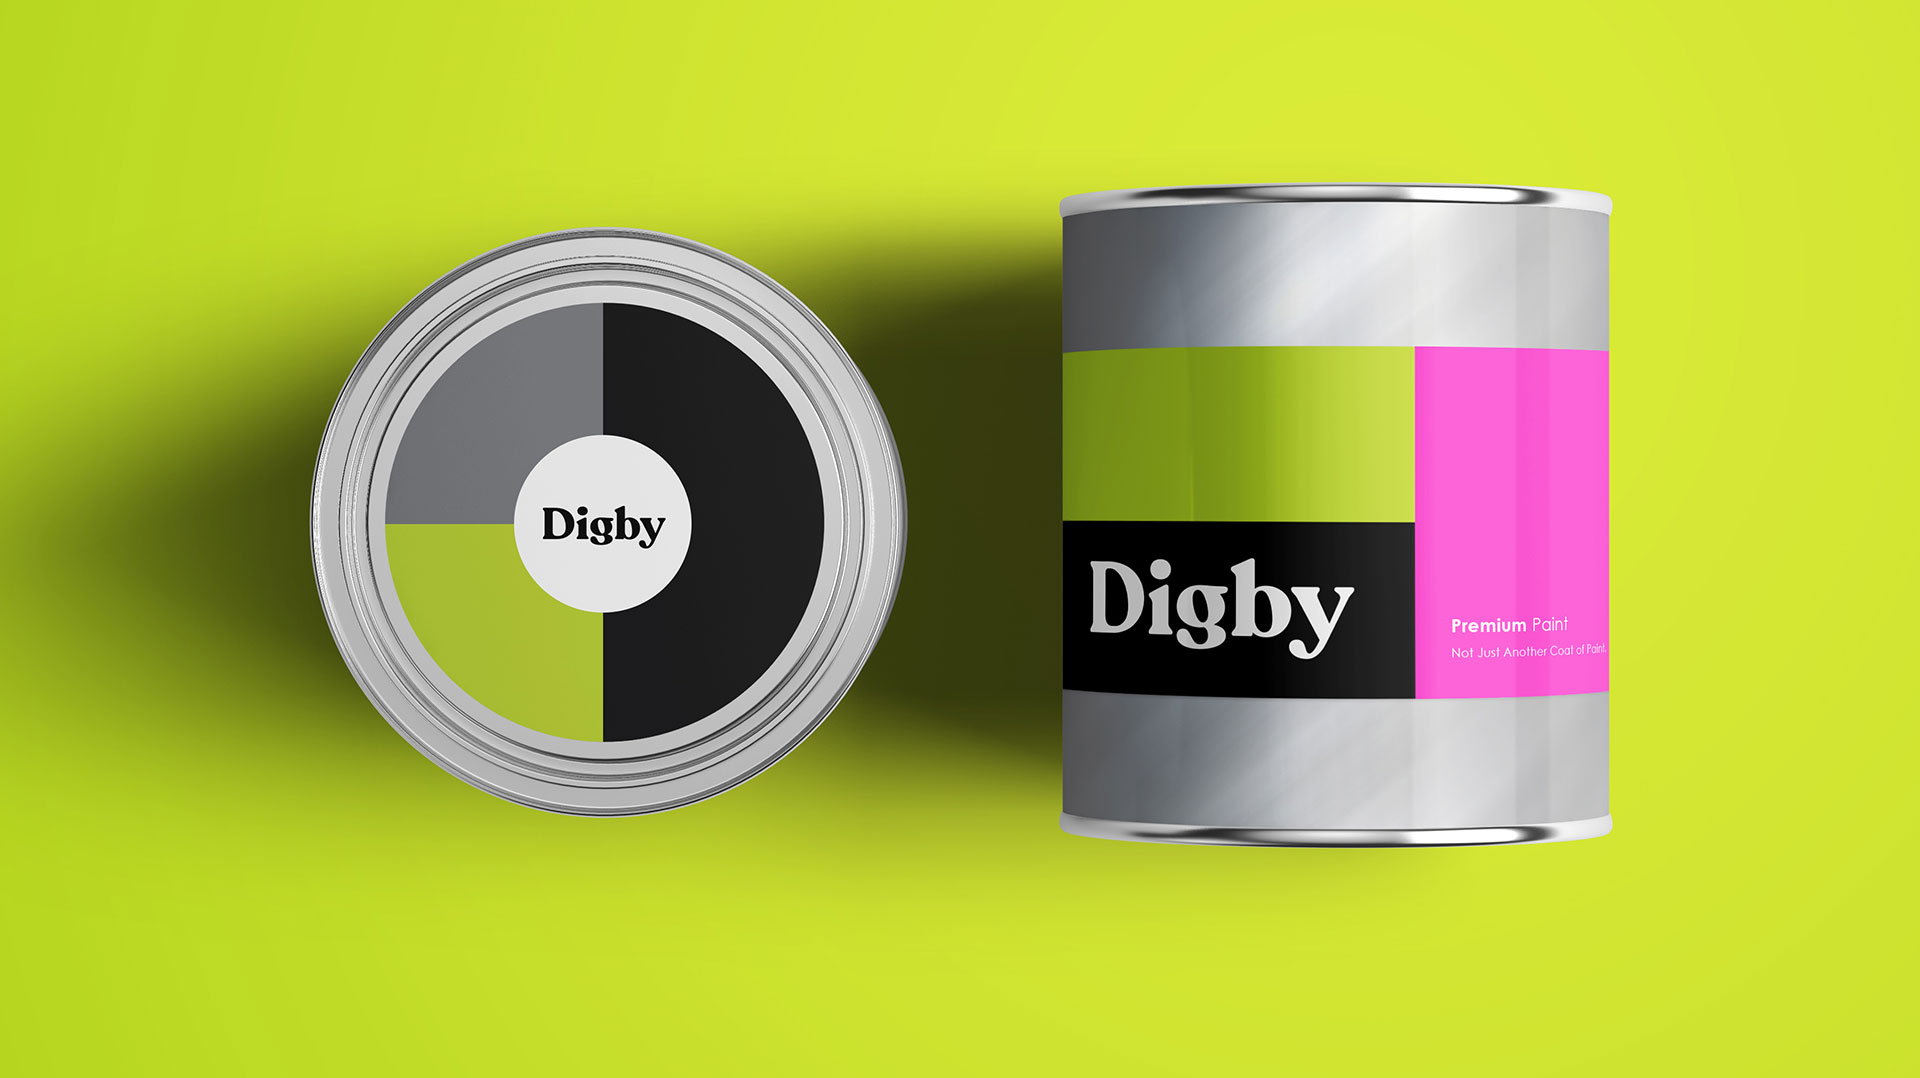 Digby Paint can